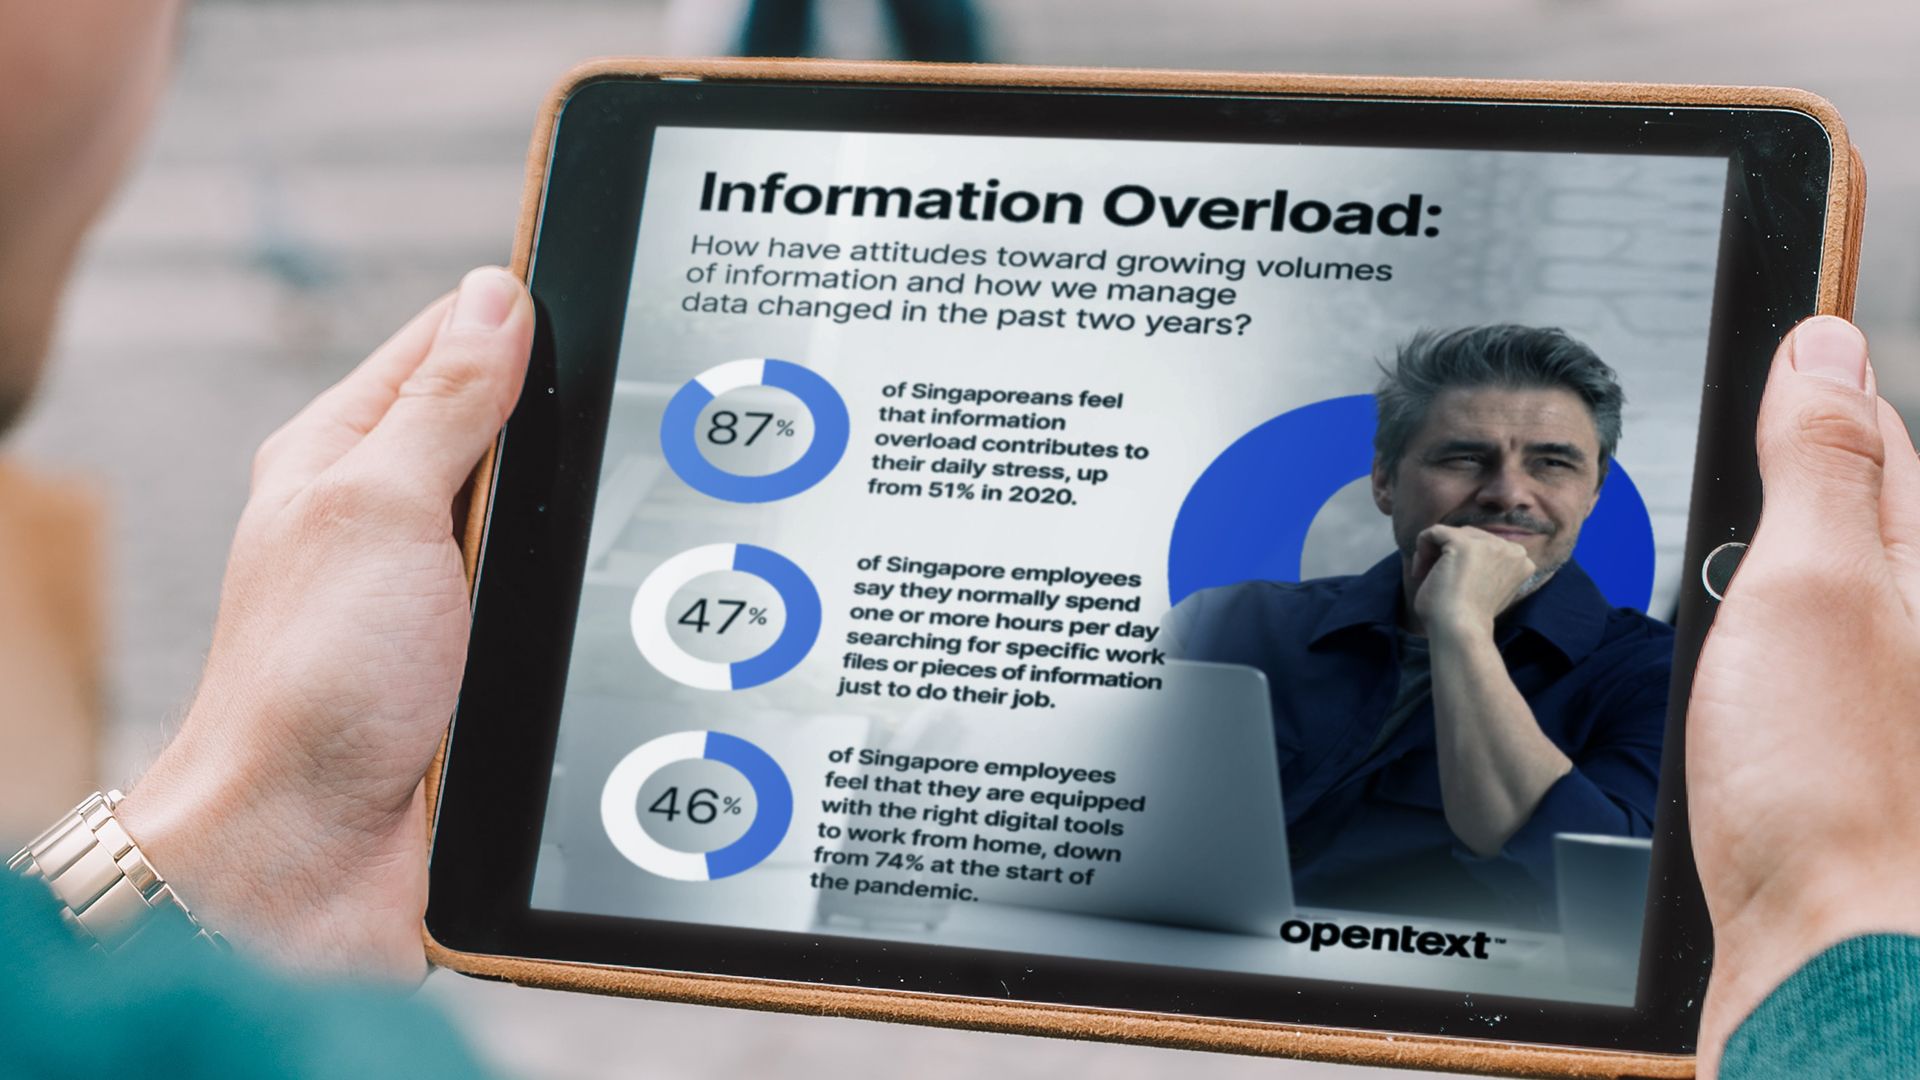 Are the majority of Singaporeans battling with information overload?